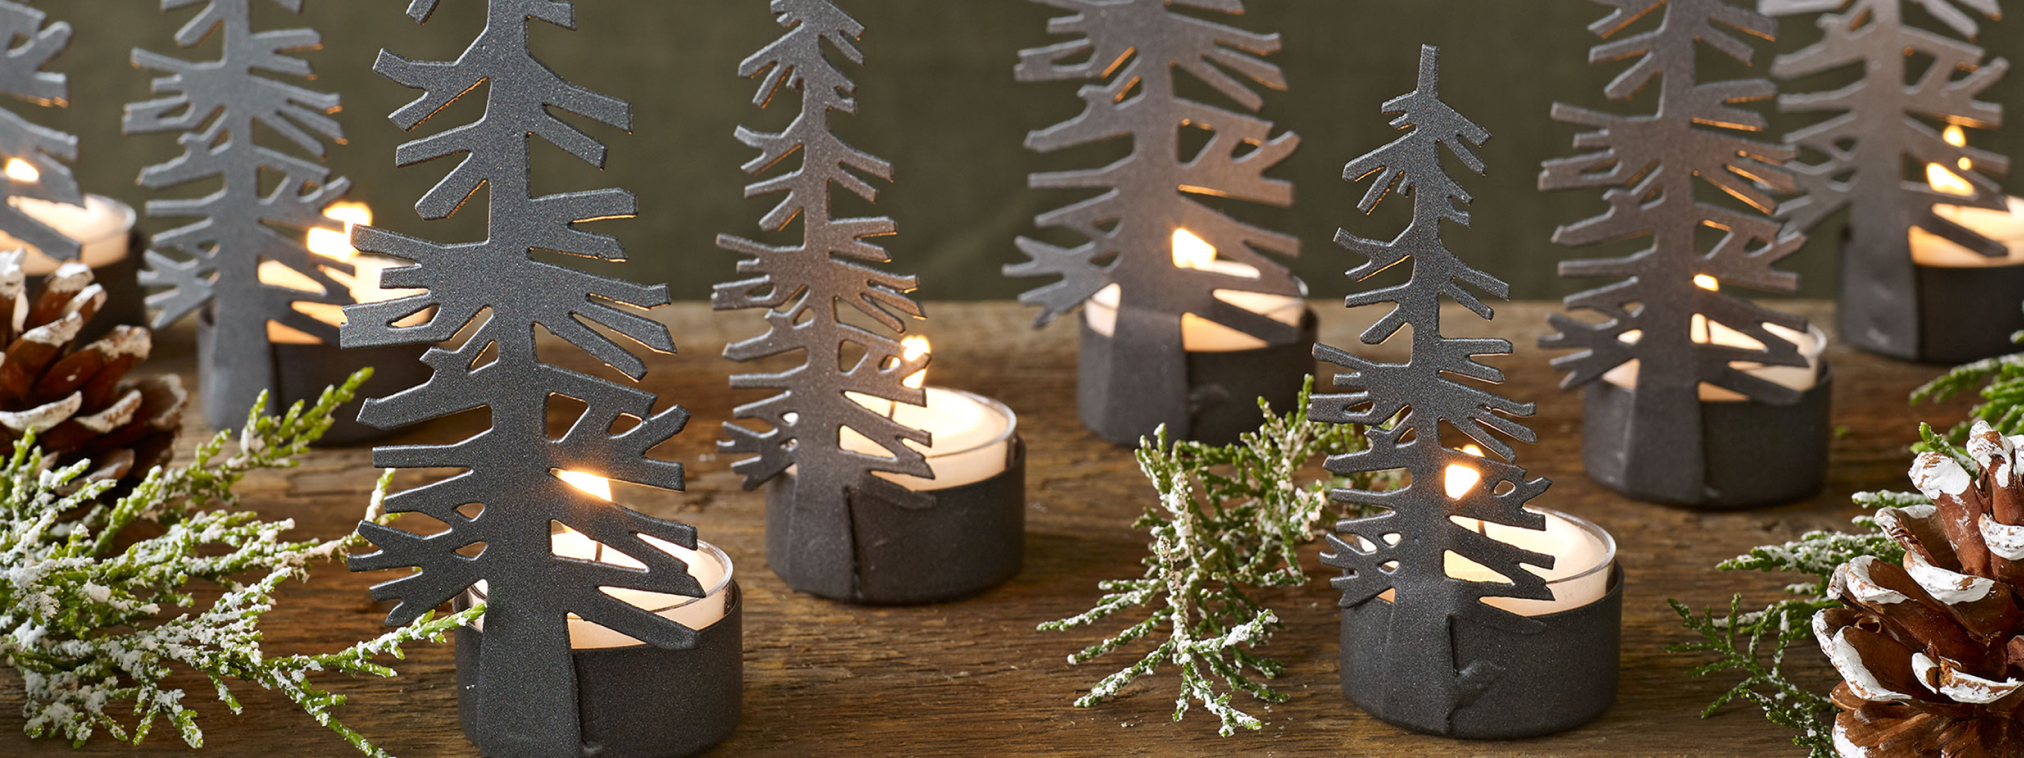 holiday lighting collection hero image |  Made with natural materials from all over the world | texxture home